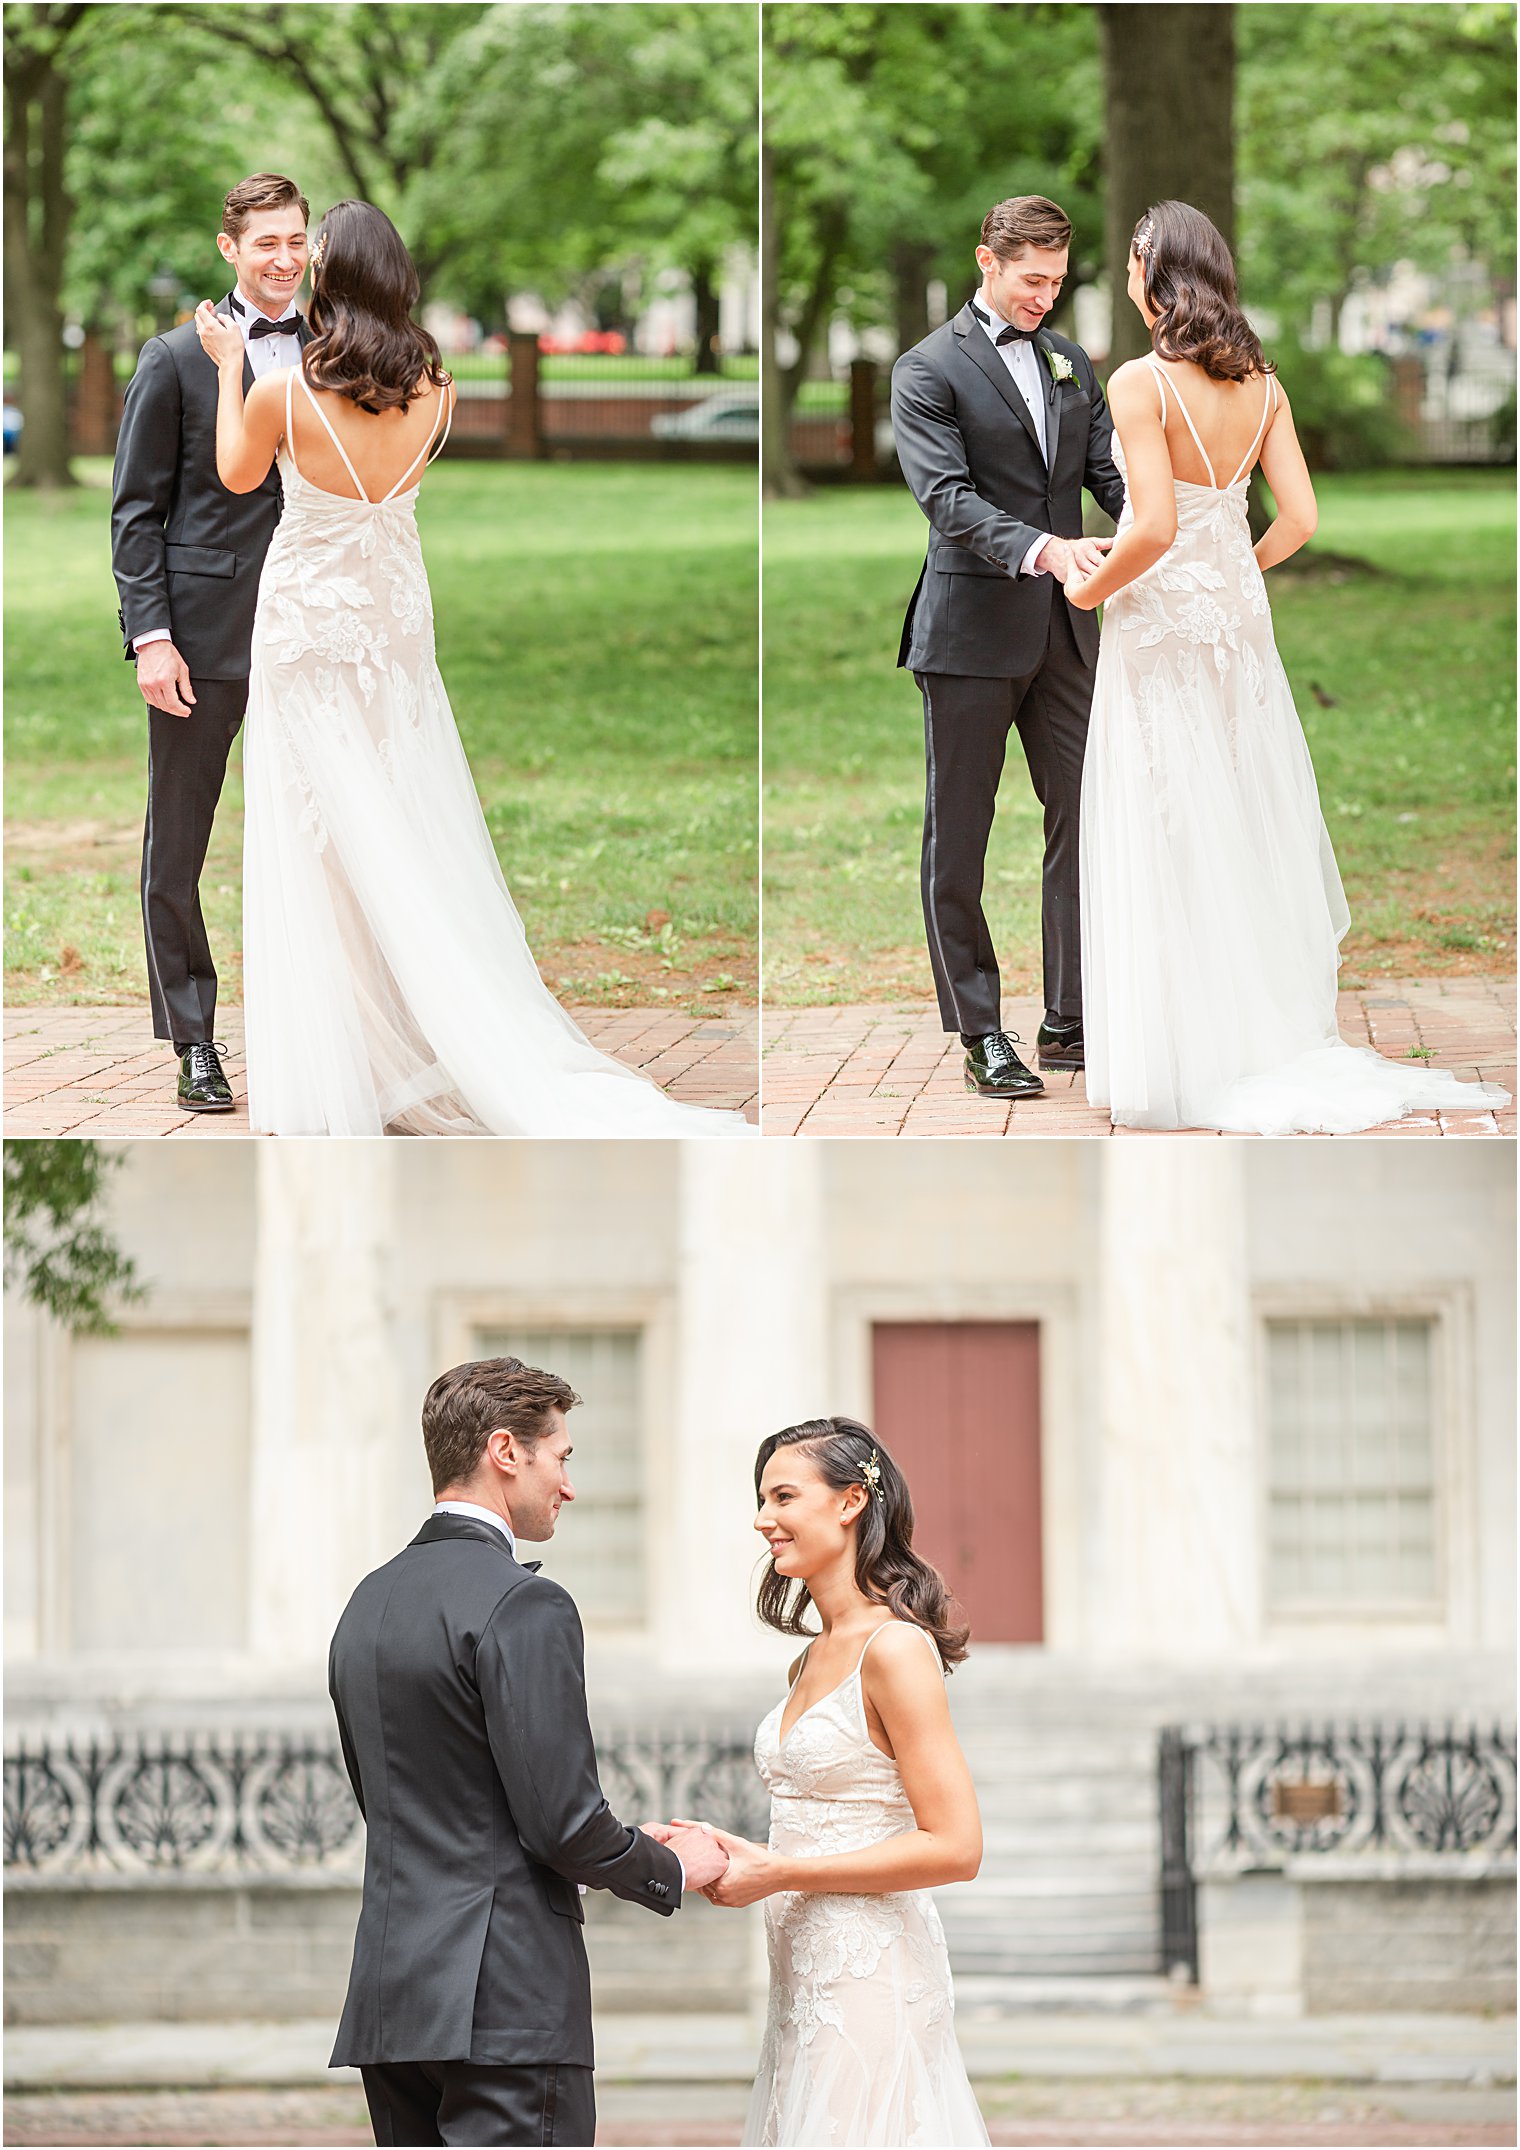 Bride + Groom share first look moment